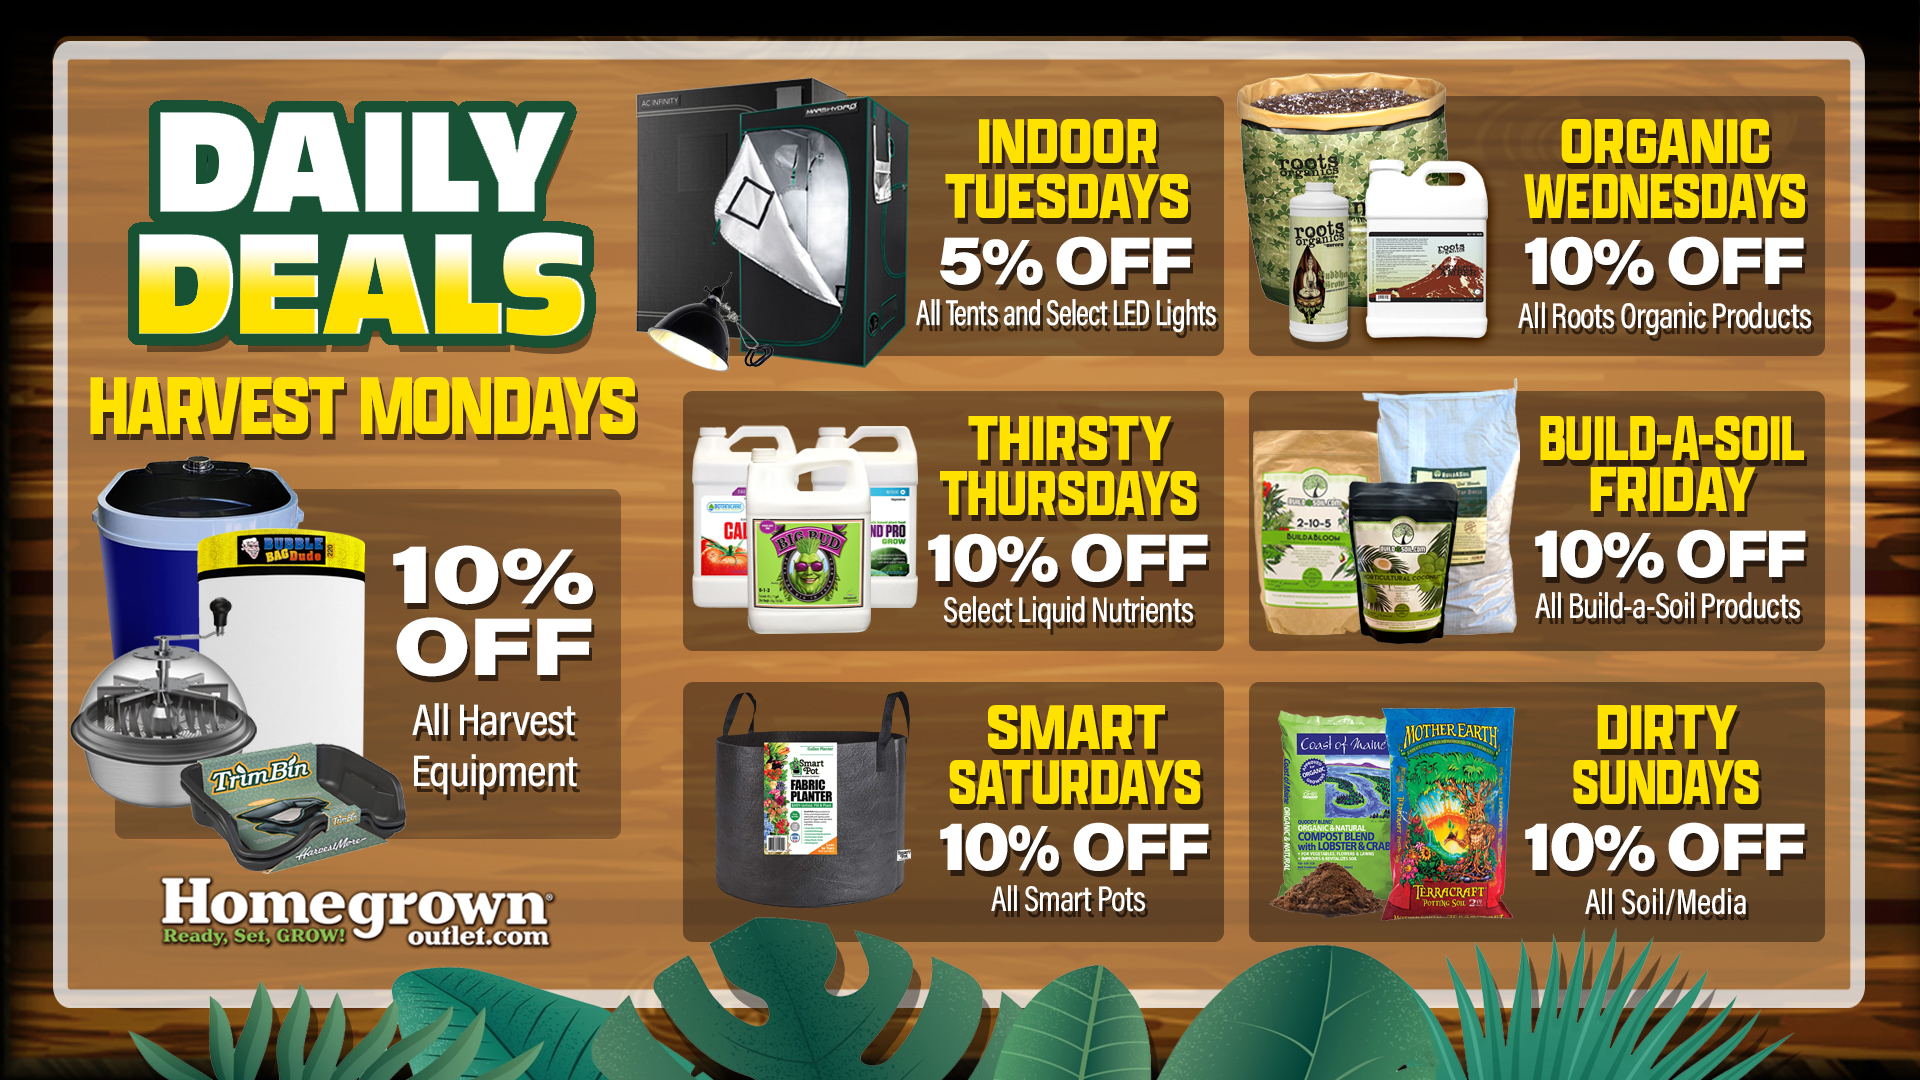 Daily deals on organic gardening supplies at Homegrown Outlet